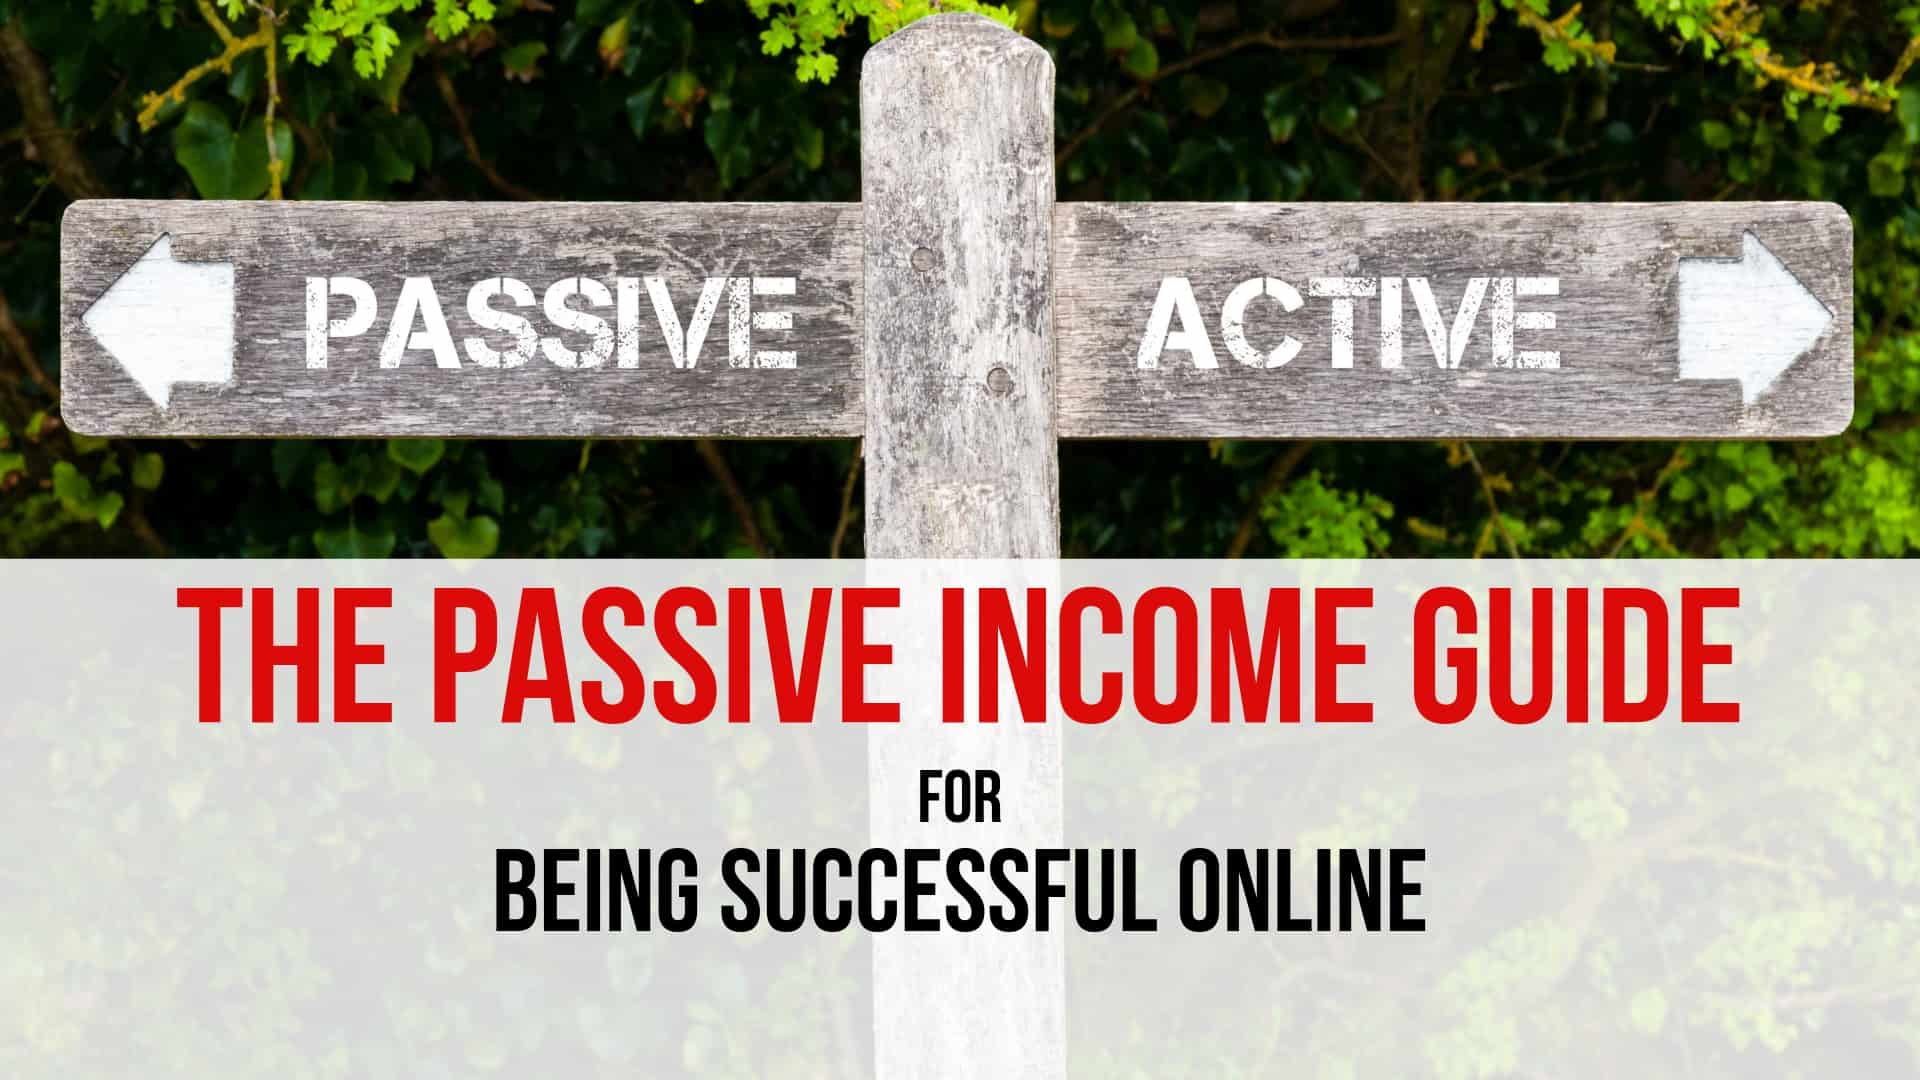 The passive income guide to be successful online